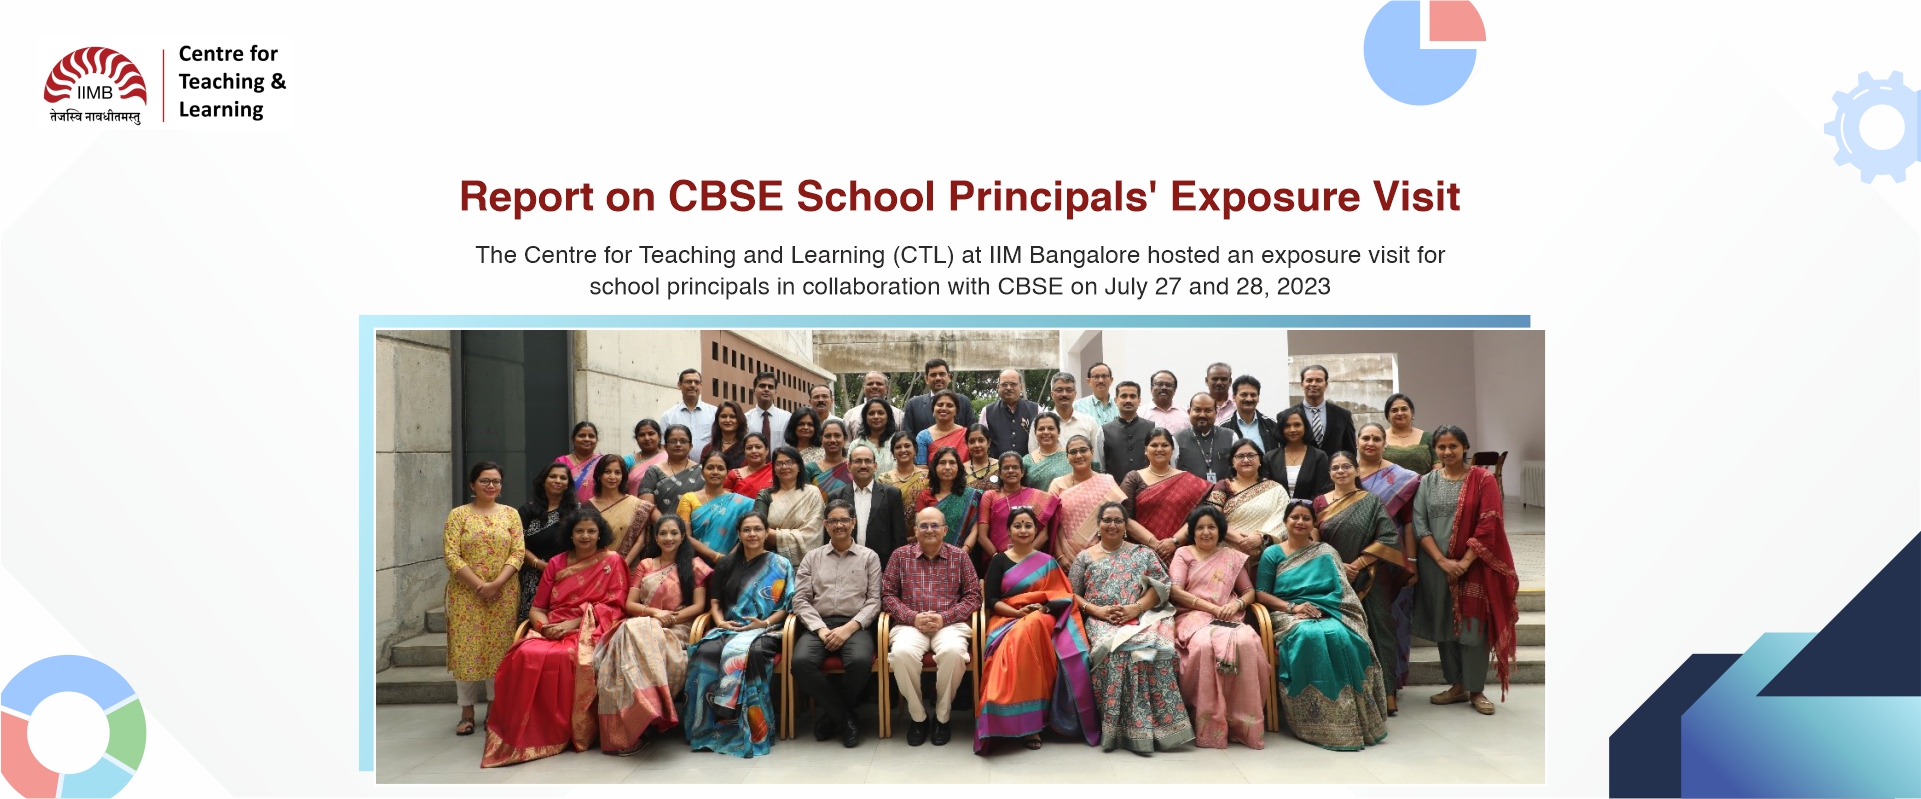 Centre for Teaching and Learning hosts an exposure visit for school principals in collaboration with CBSE on July 27-28